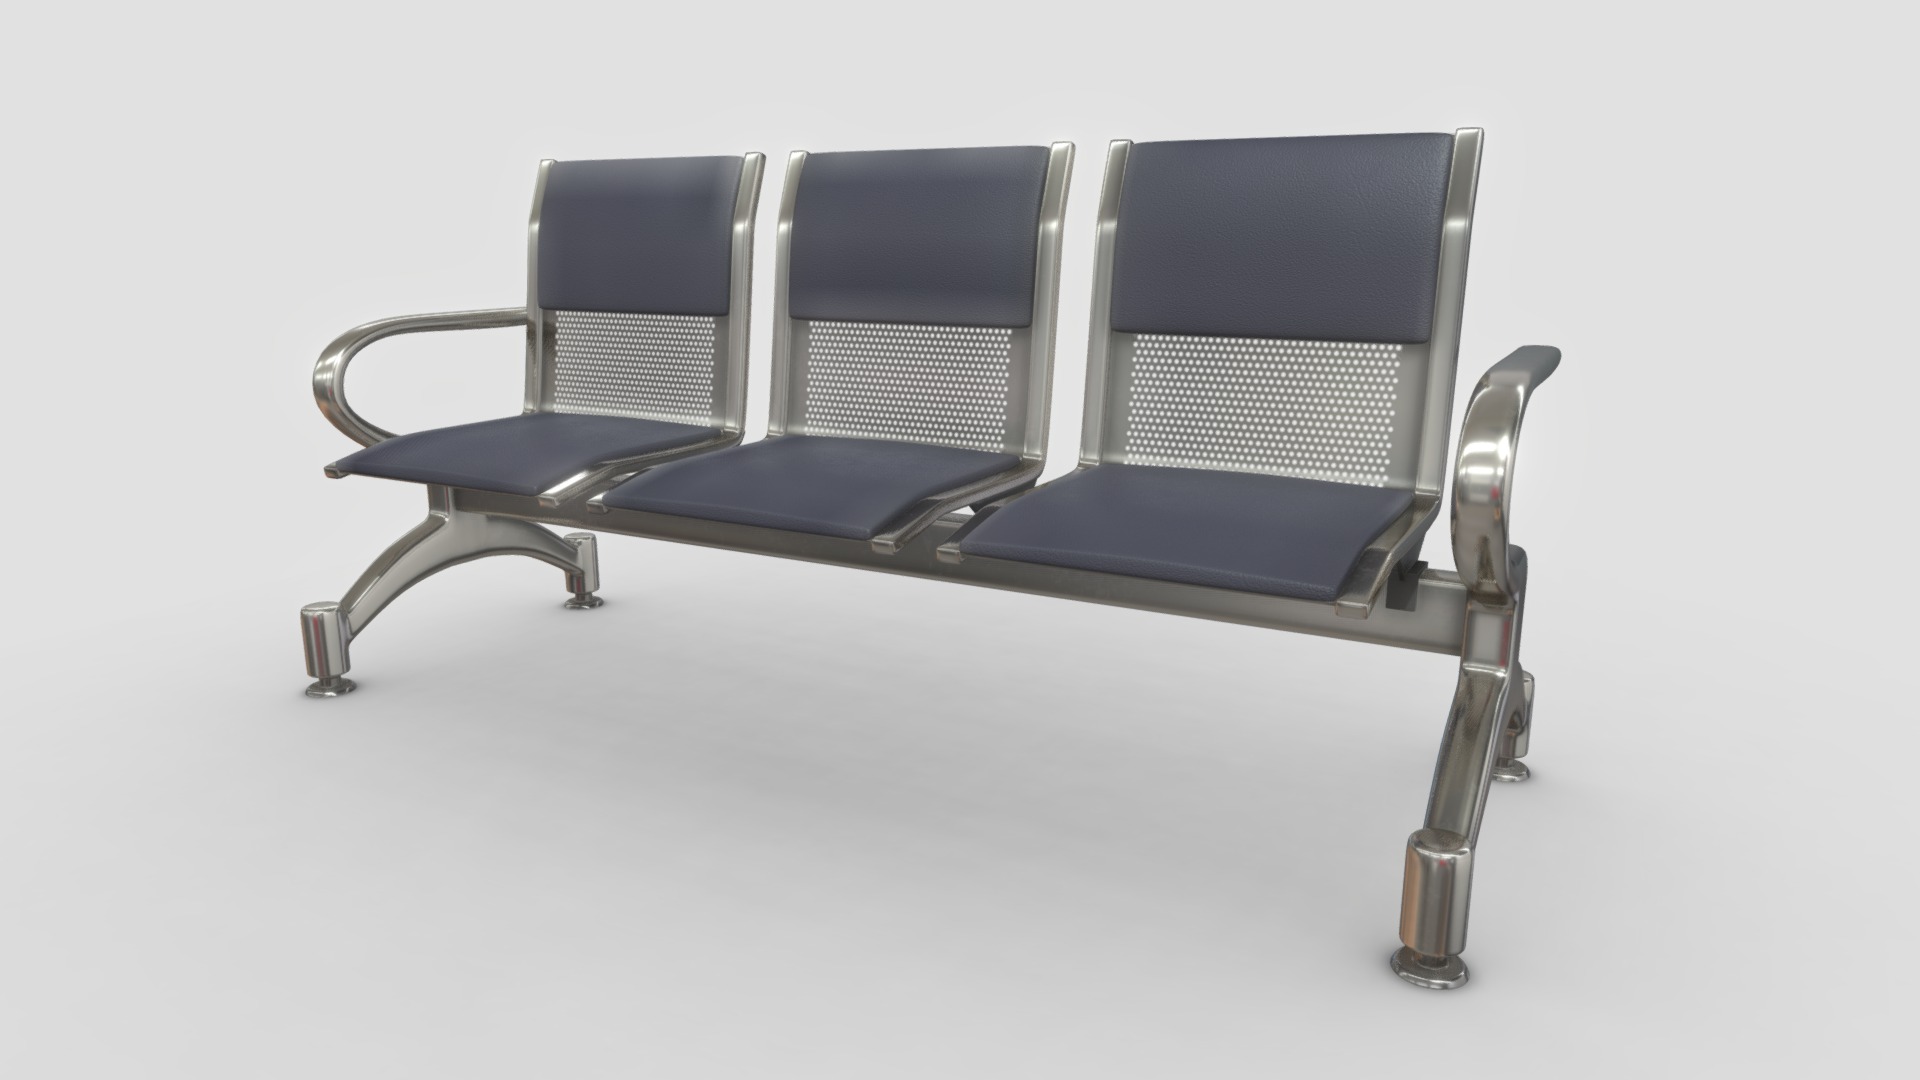 3D model Waiting bench chair - This is a 3D model of the Waiting bench chair. The 3D model is about a couple of black chairs.